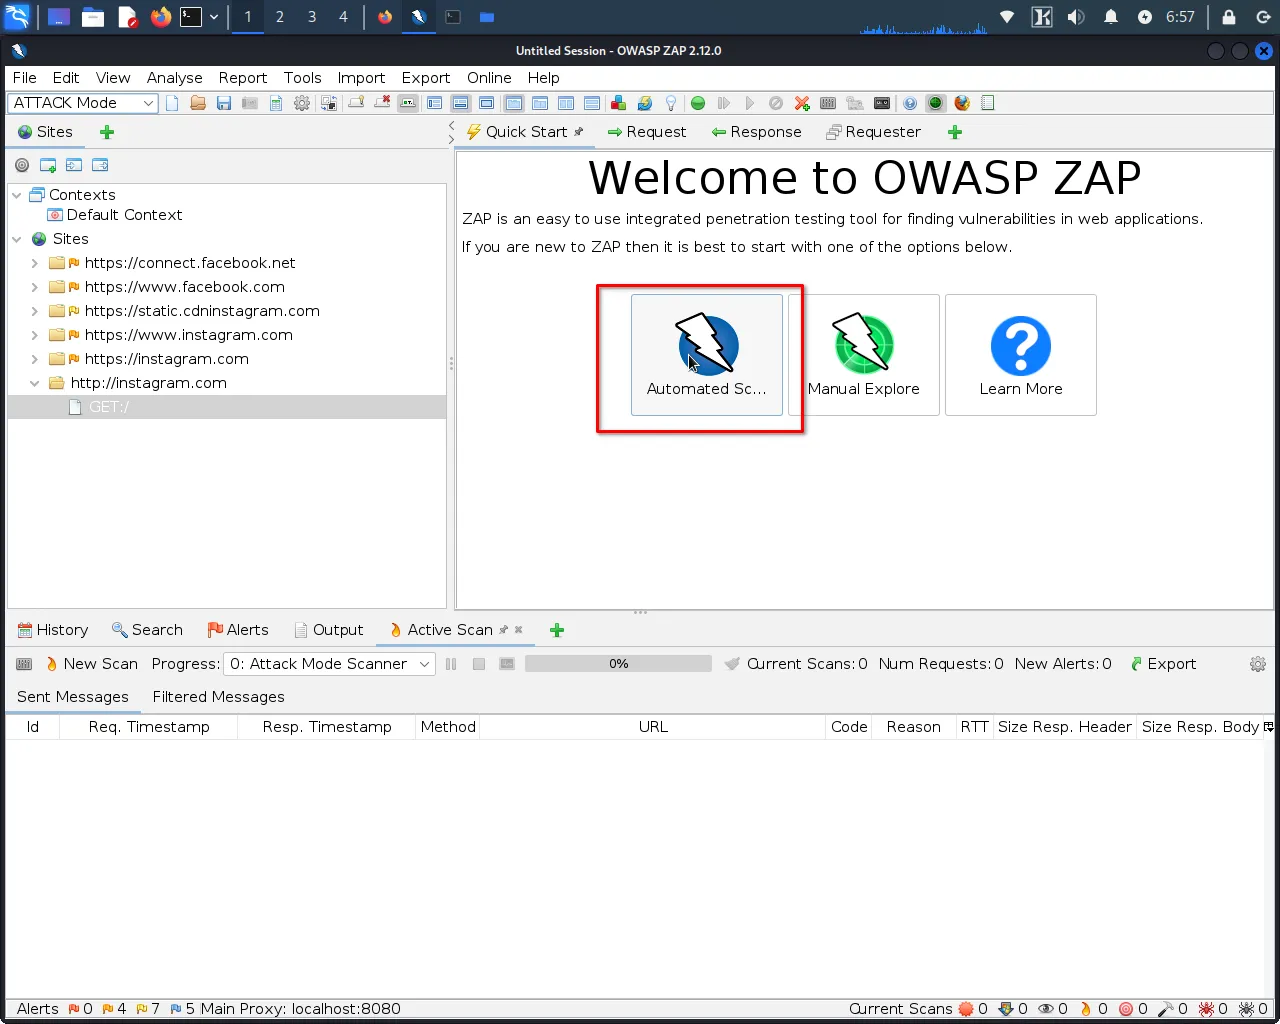 Perform a vulnerability scan with OWASP ZAP